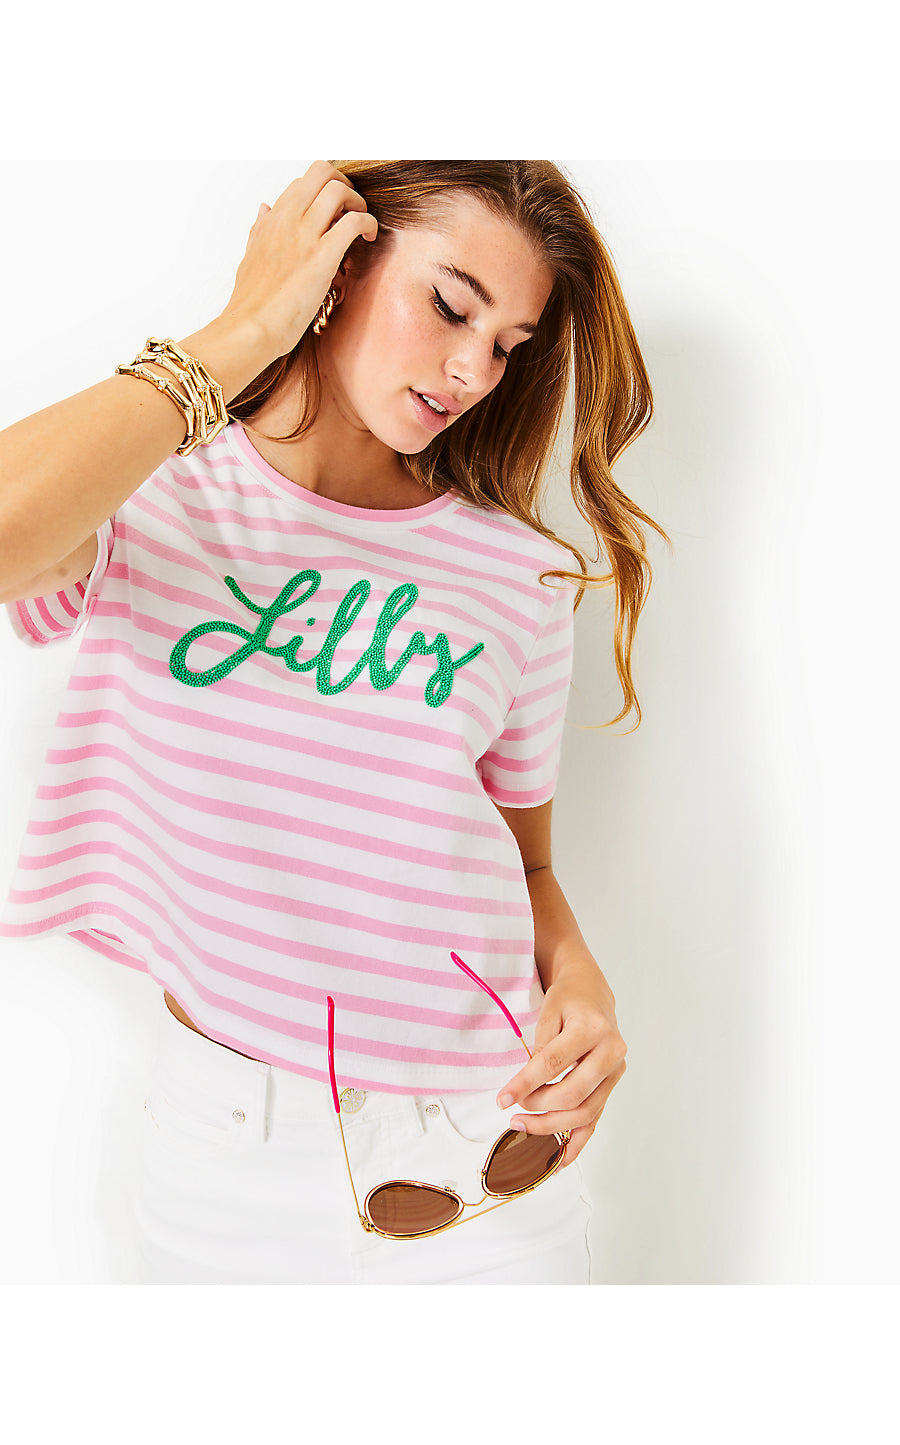 Keenan Knit Top | Conch Shell Pink Striped Lilly Pulitzer Embellished Top